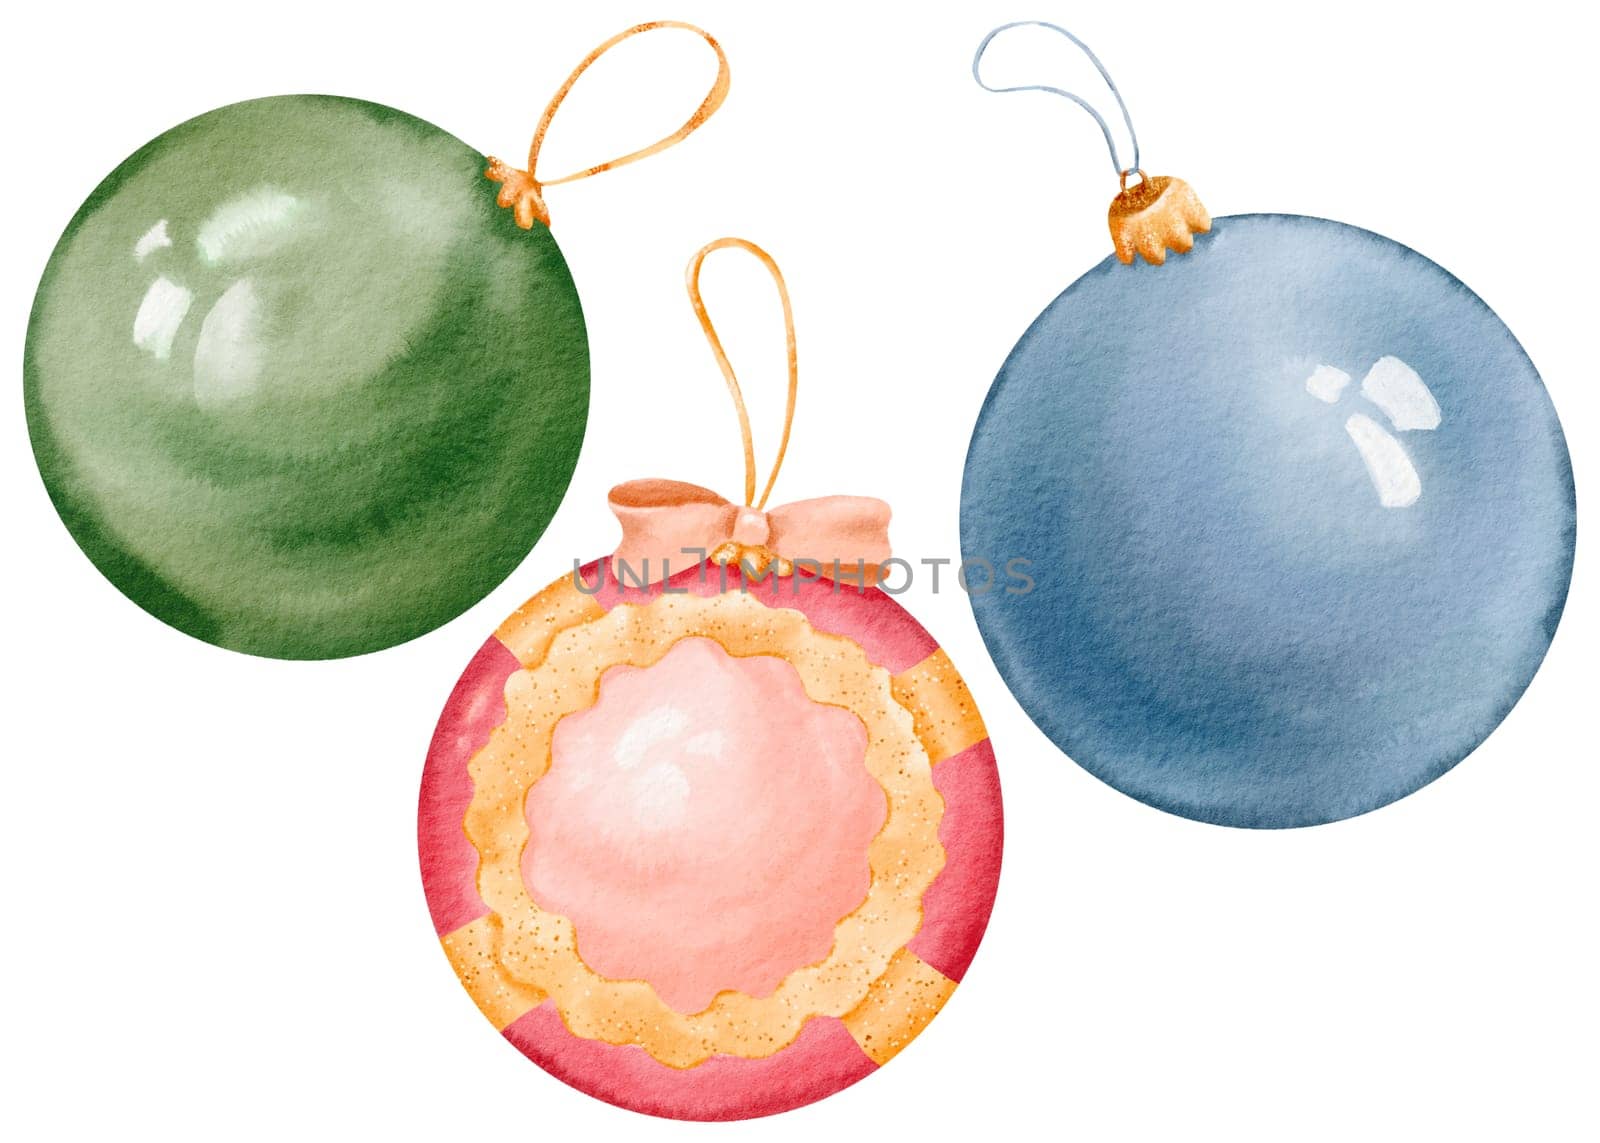 Set of creative christmas balls hand made insolated watercolor illustration. winter season. decorative background for pine tree, greeting card, bauble decorations, books. New Year holiday circle toy by Art_Mari_Ka